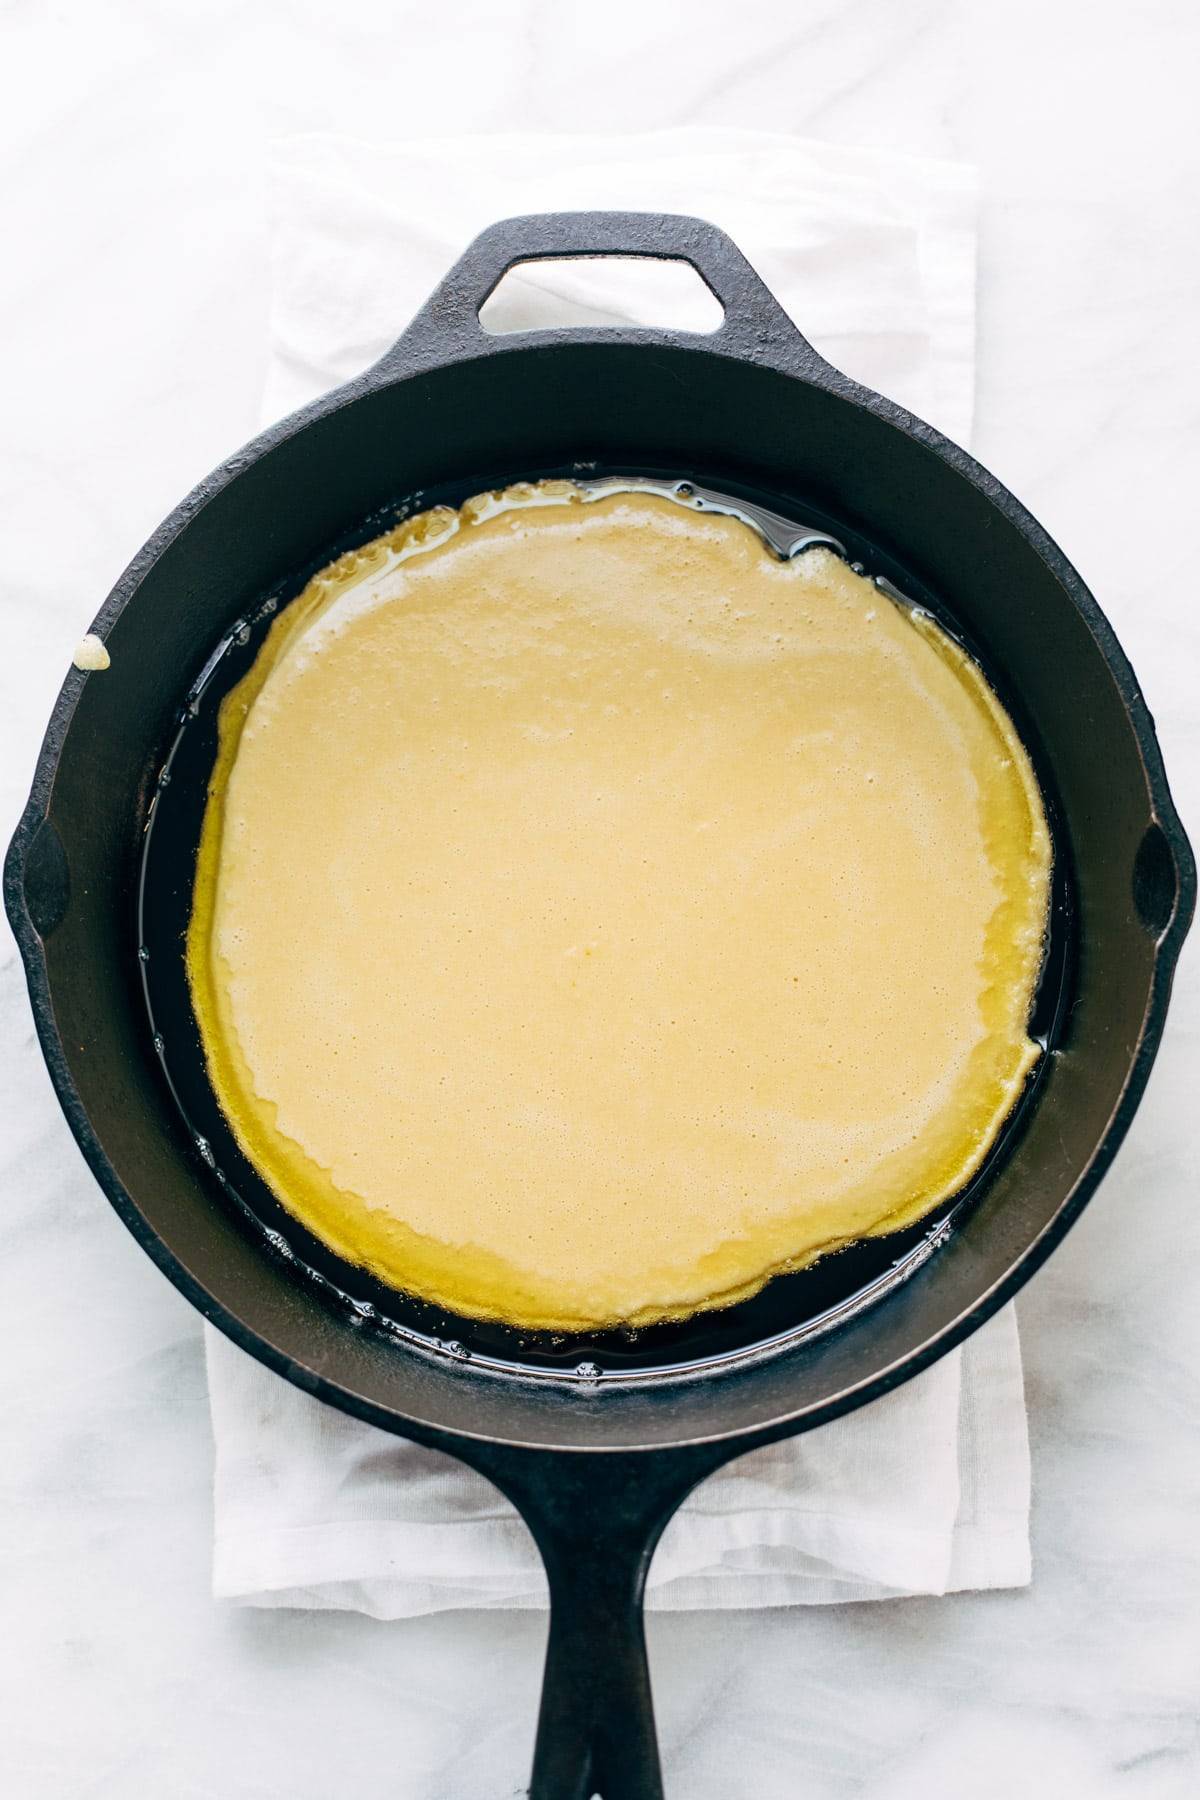 Socca batter in a cast iron pan.